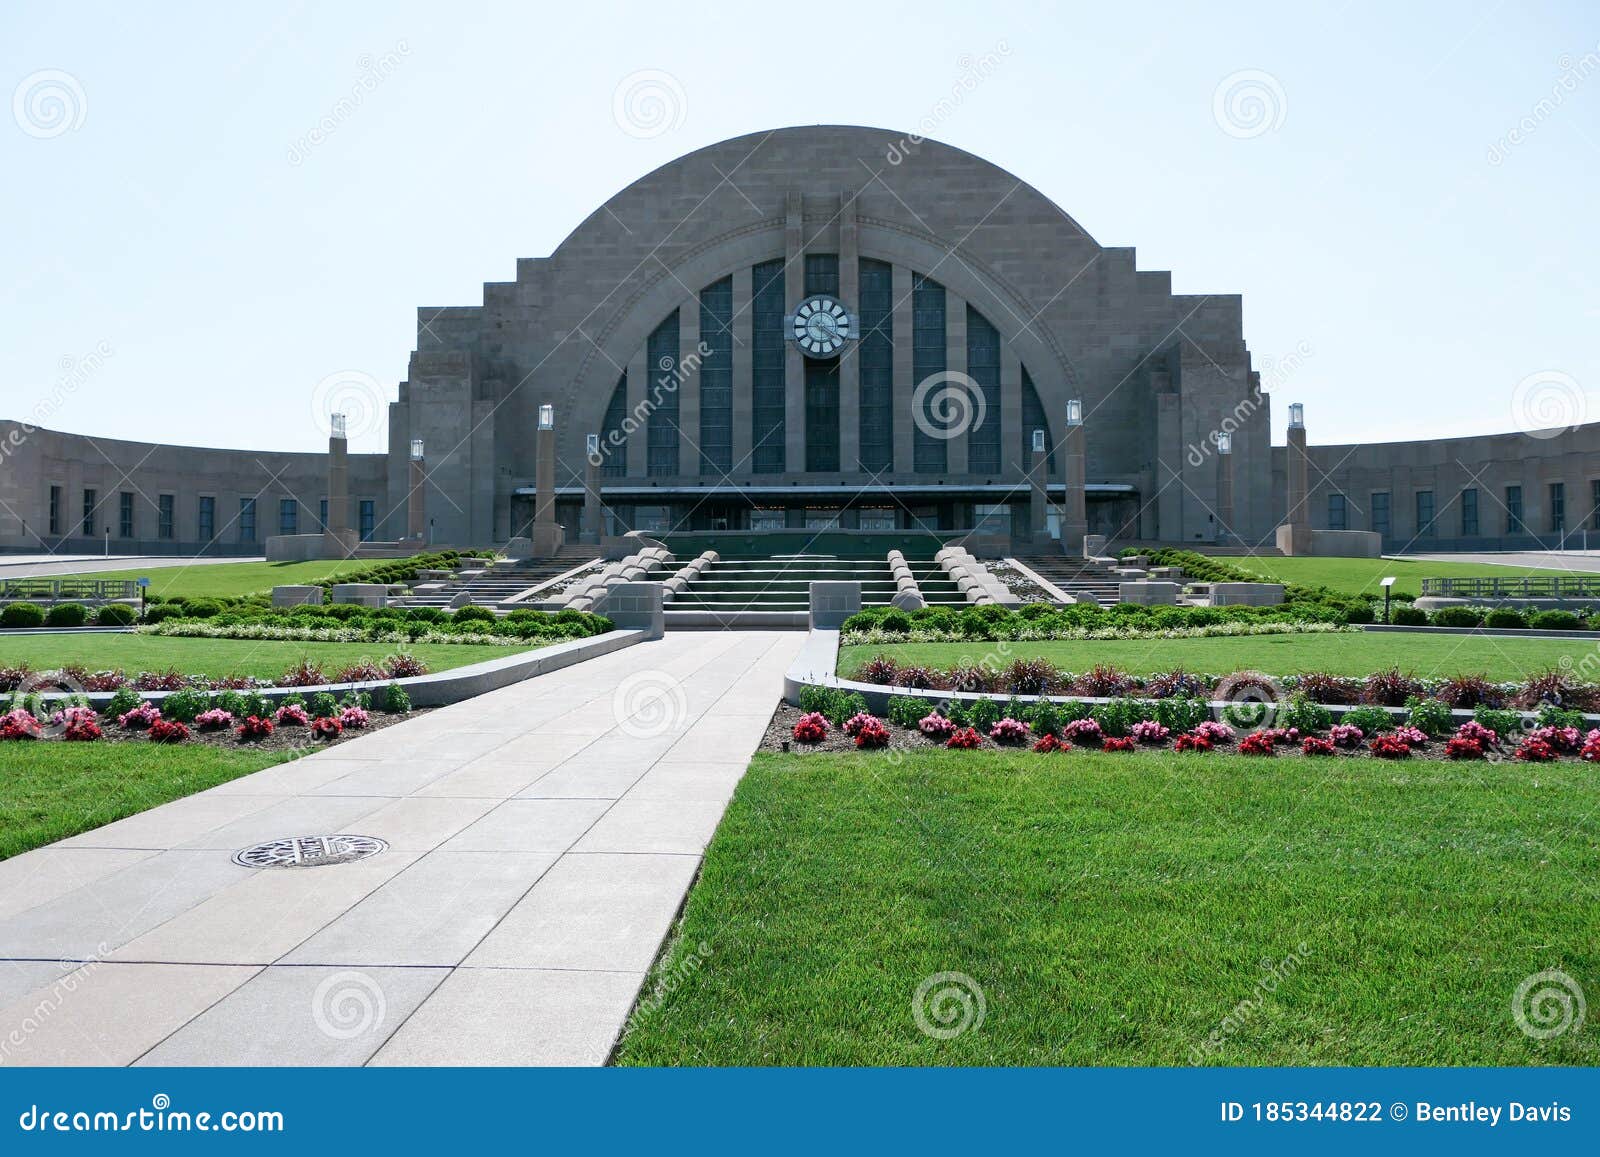 union terminal and gardens in the summer